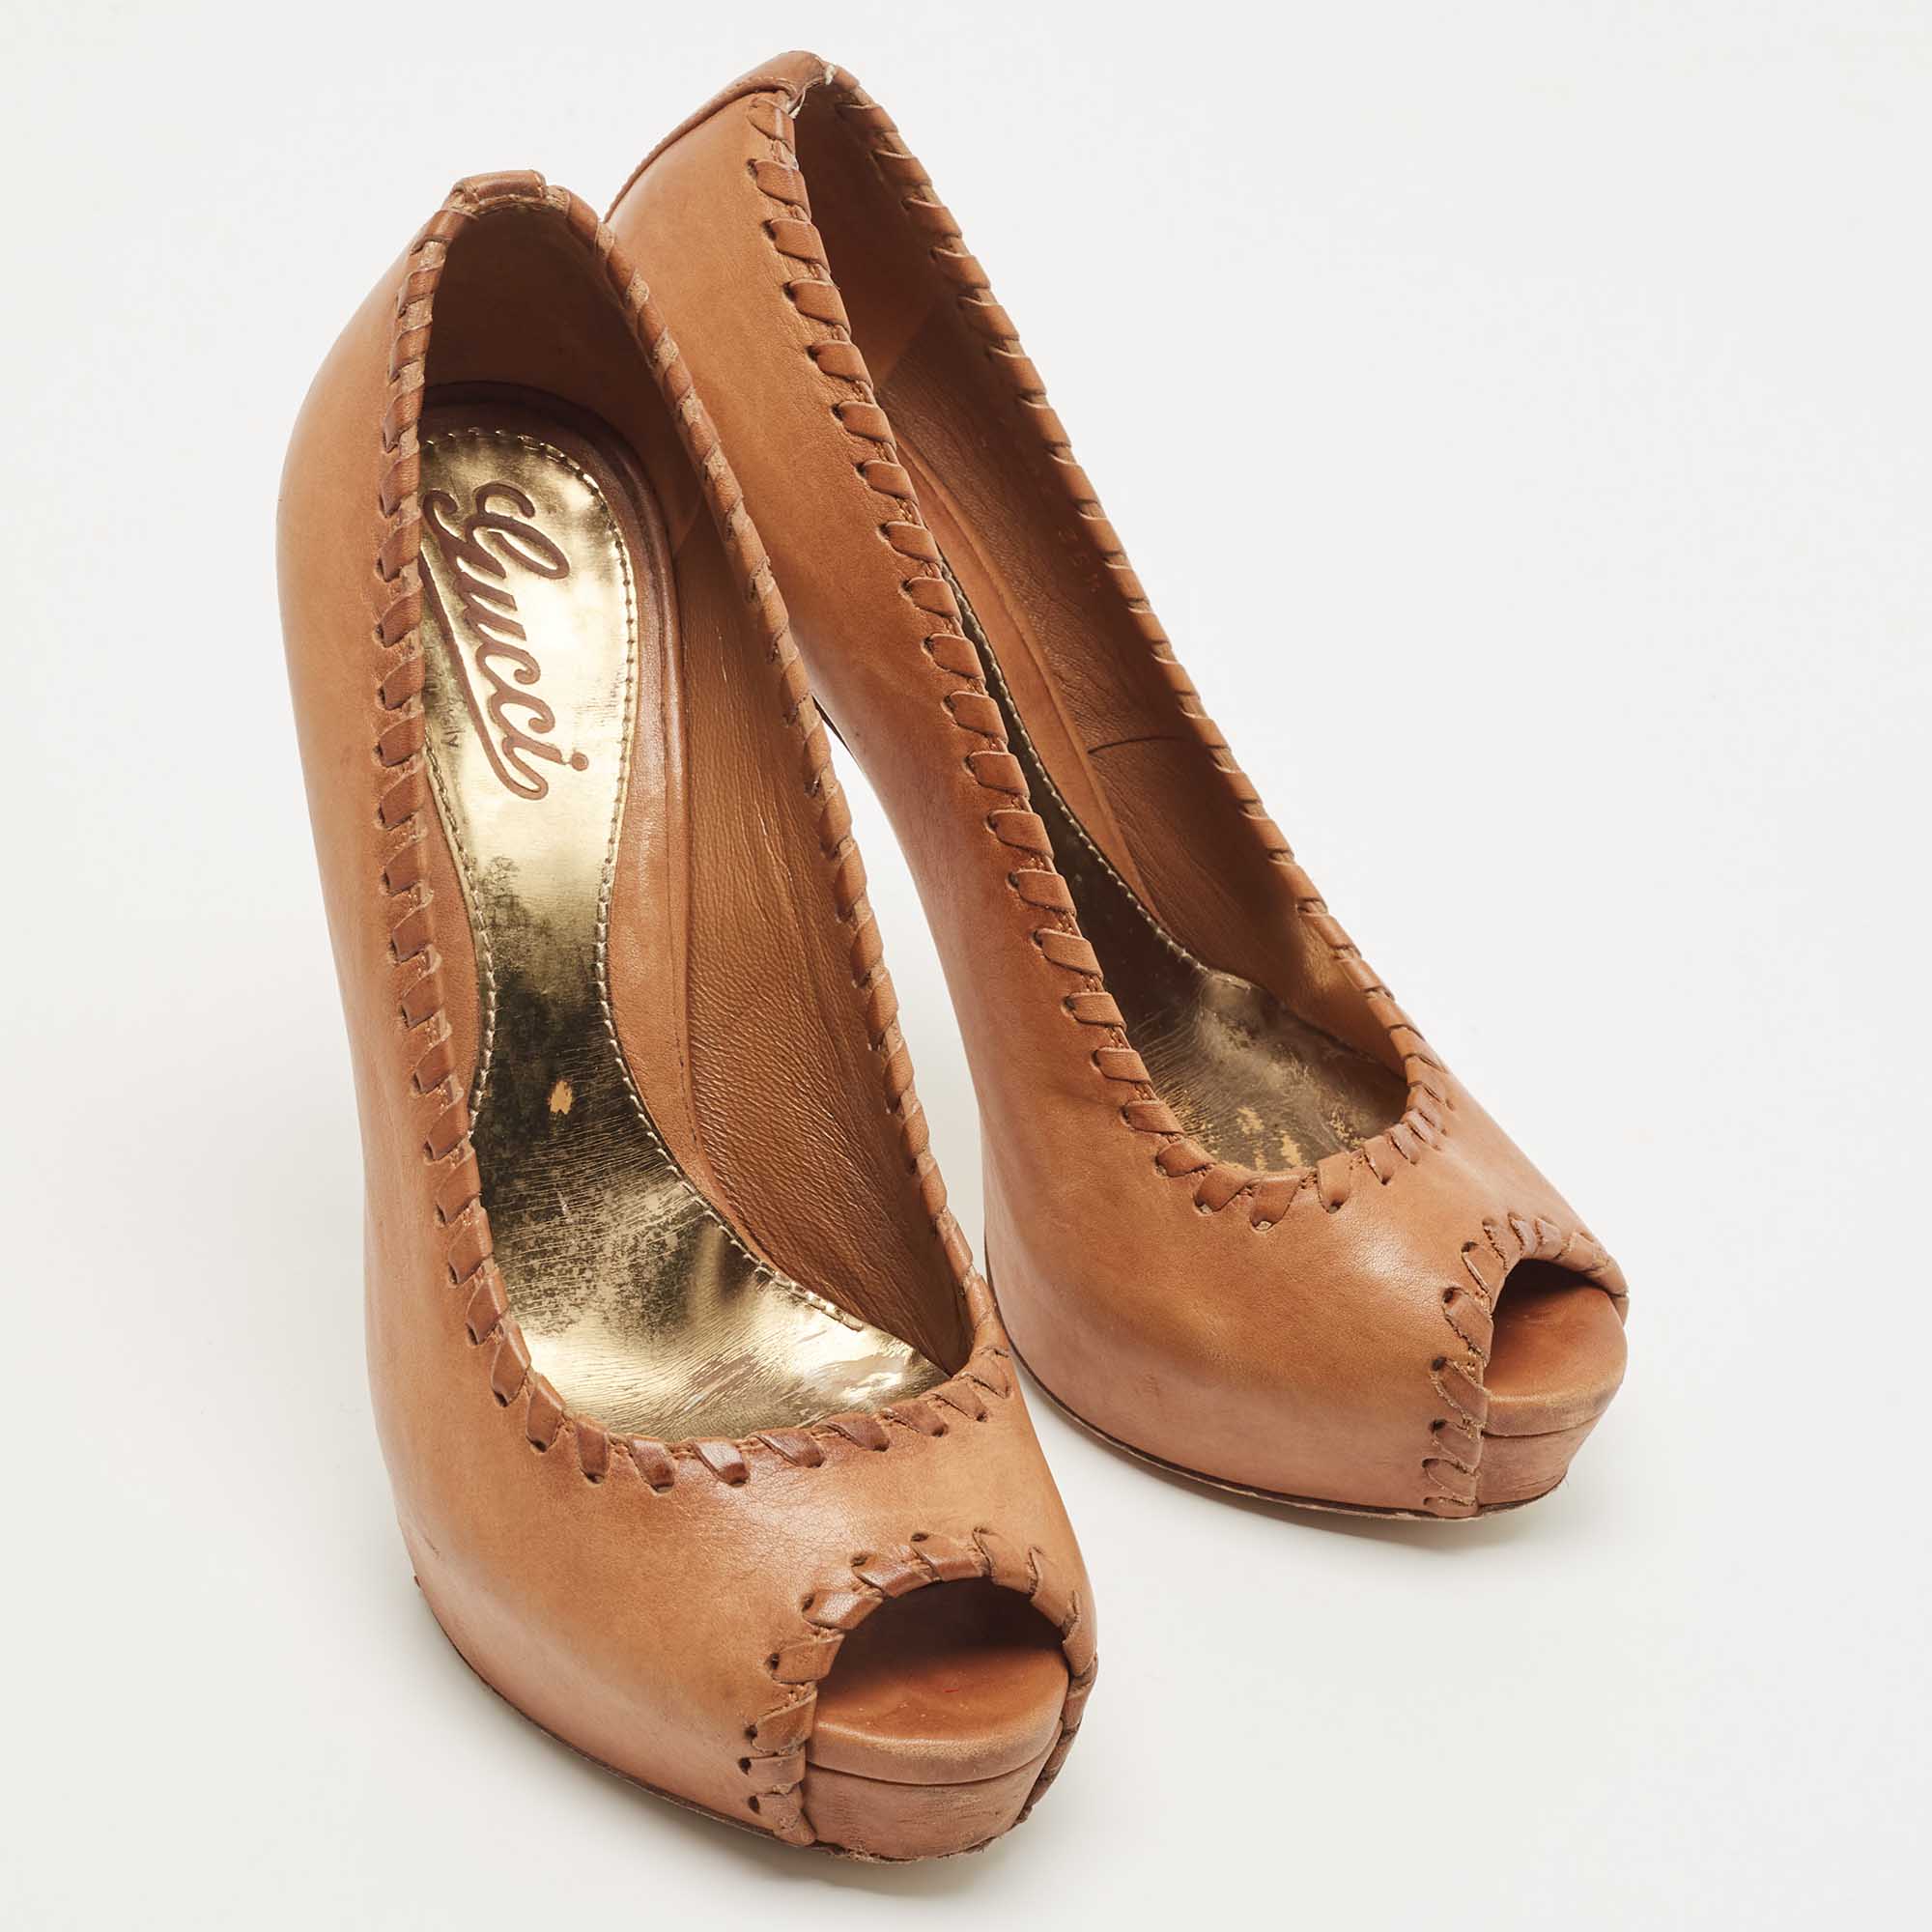 Gucci Tan Leather Whipstitch Peep Toe Pumps Size 35.5